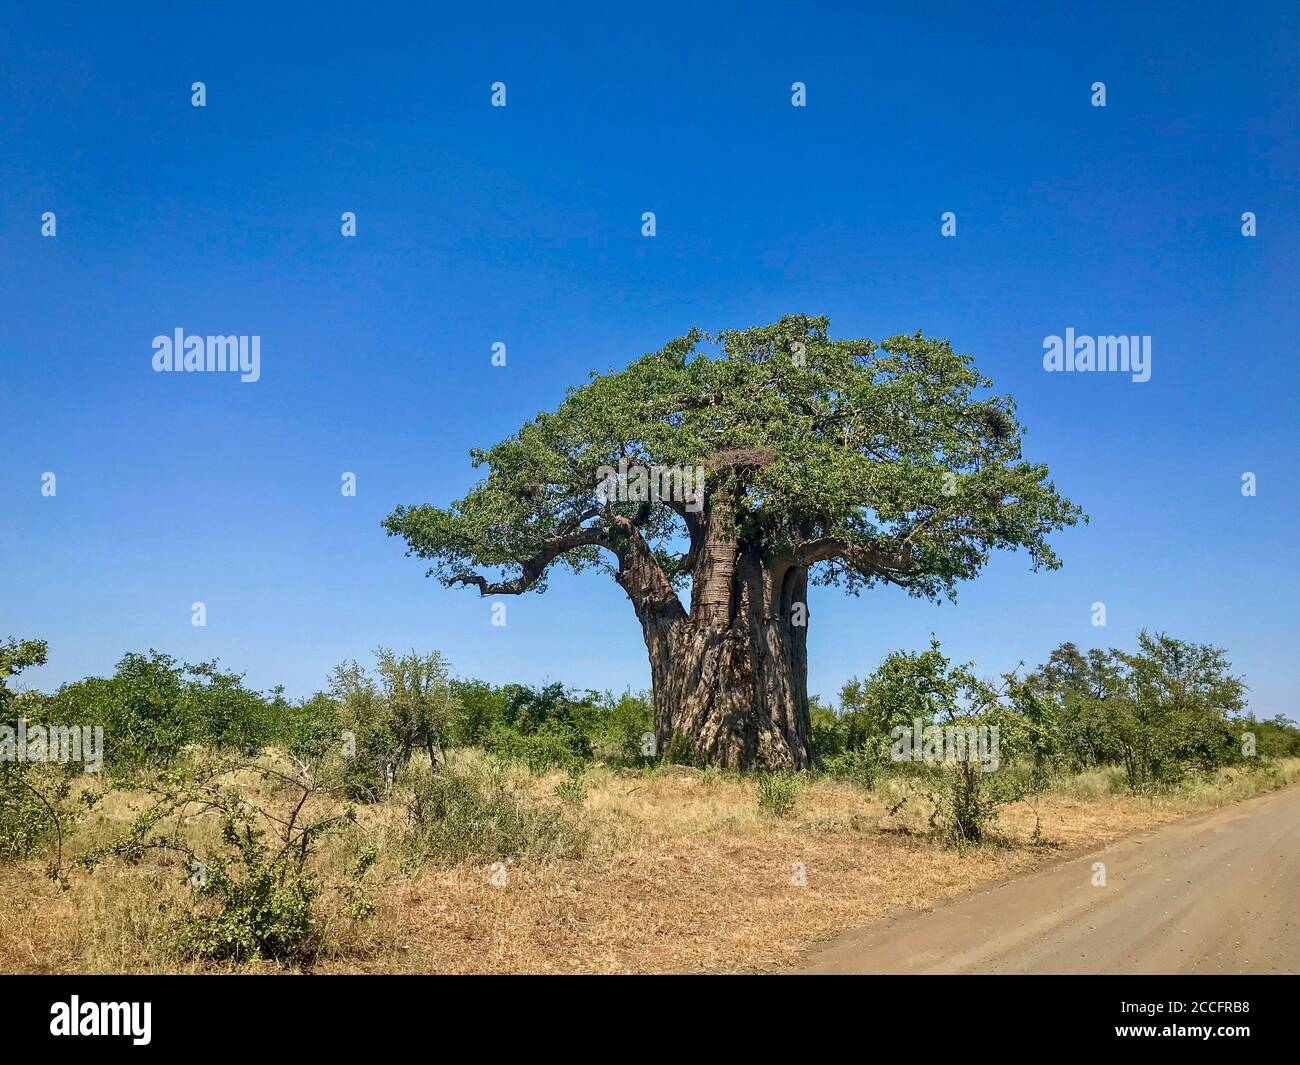 Beautiful baobab tree with green canopy full of leaves standing near a dirt road on a sunny day with blue skies in Kruger National Park in South Afric Stock Photo